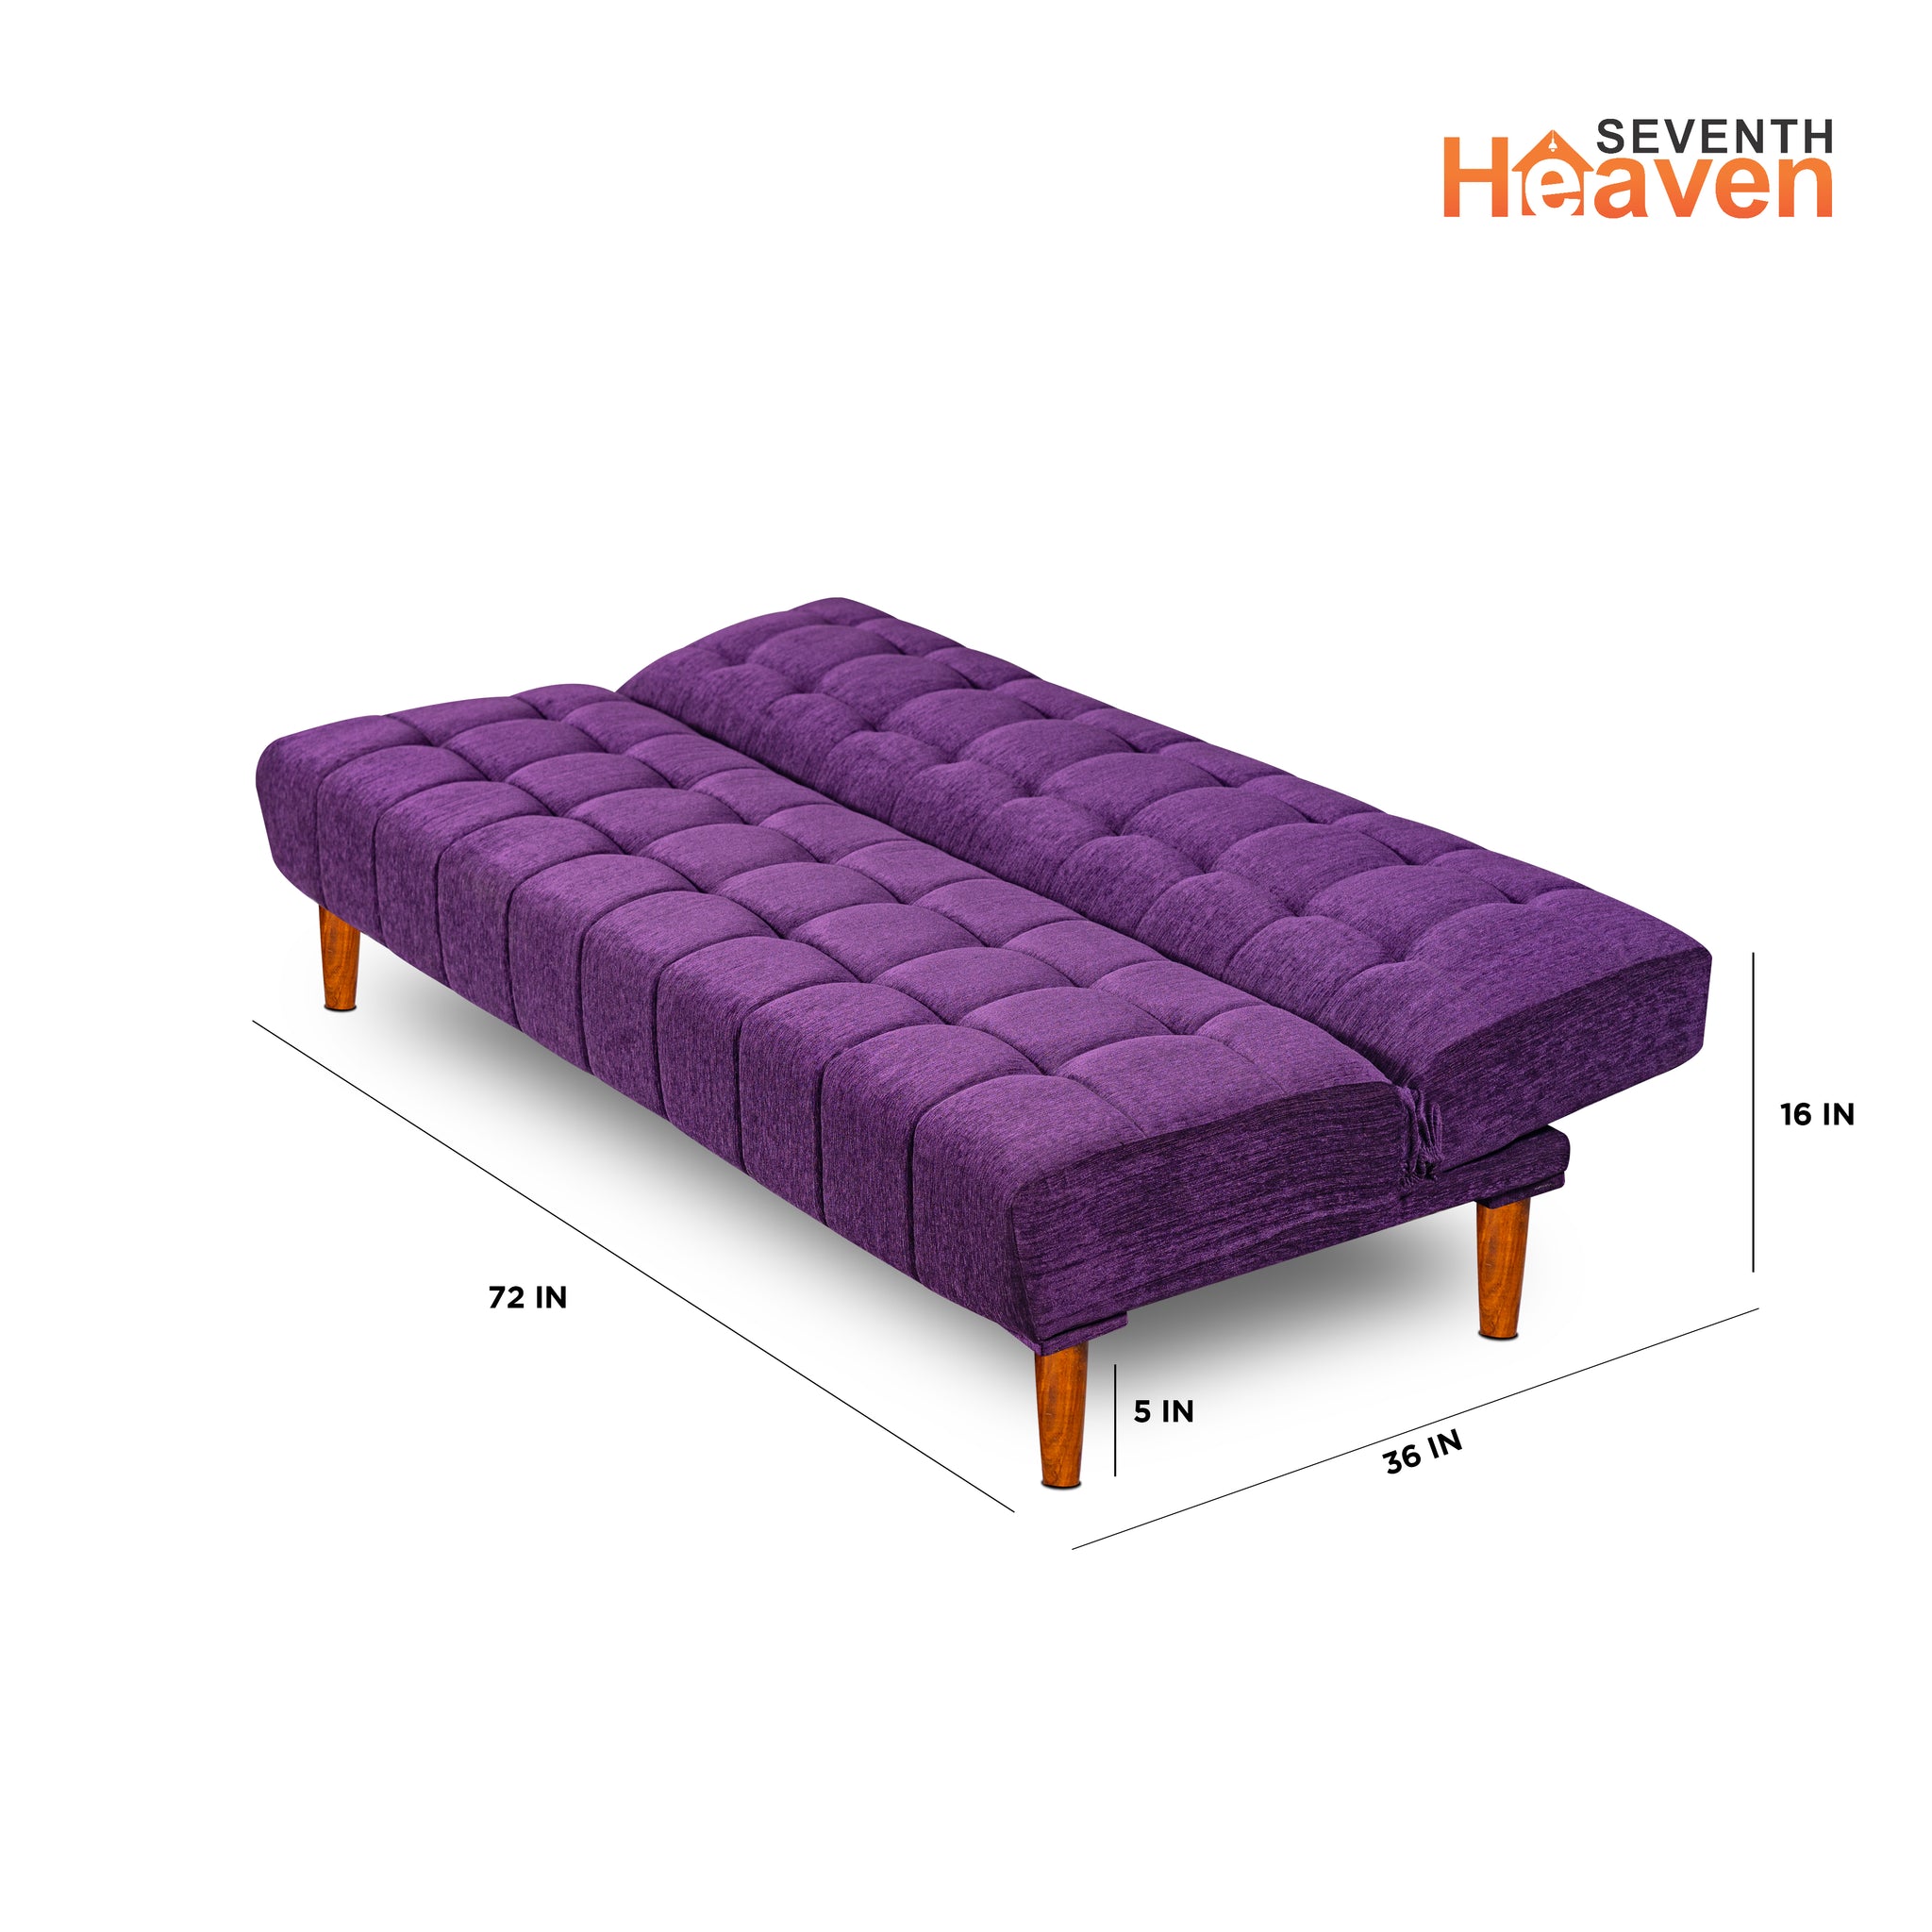 Seventh Heaven Florida Neo 4 Seater Wooden Sofa Cum Bed Modern & Elegant Smart Furniture Range for luxurious homes, living rooms and offices. Use as a sofa, lounger or bed. Perfect for guests. Molphino fabric with sheesham polished wooden legs. Purple colour.